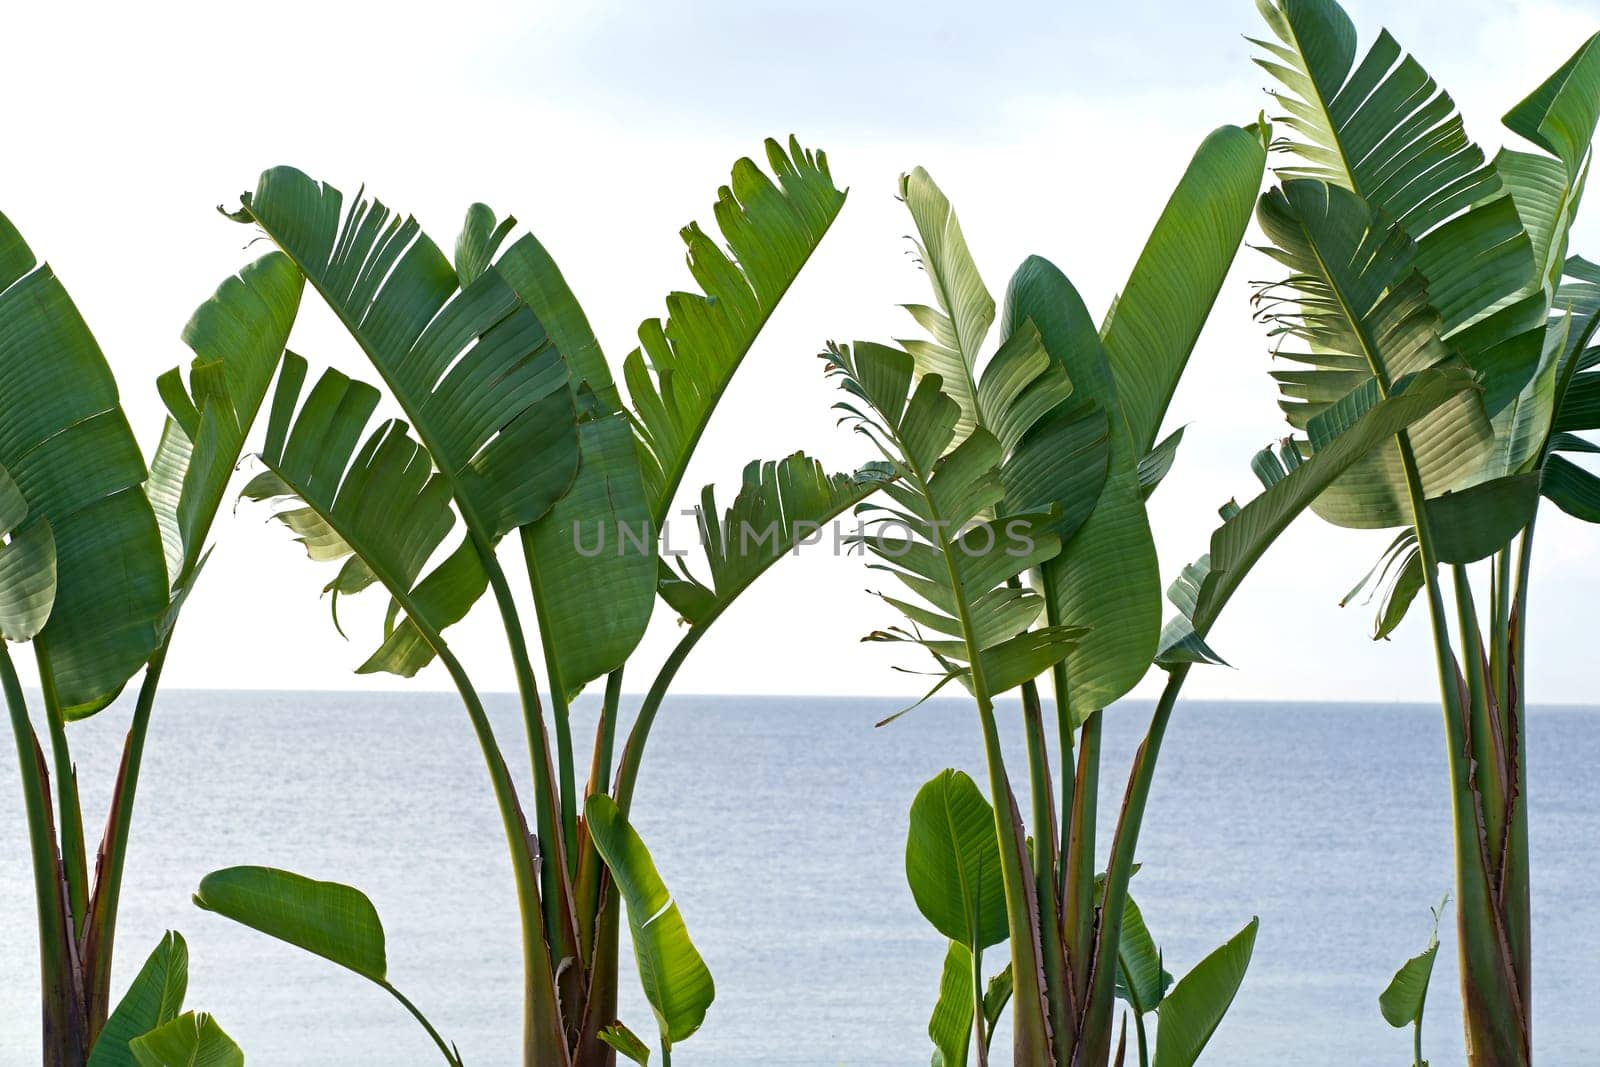 Banana palms next to the sea. Tropical economic crops that are easy to grow, yield fast